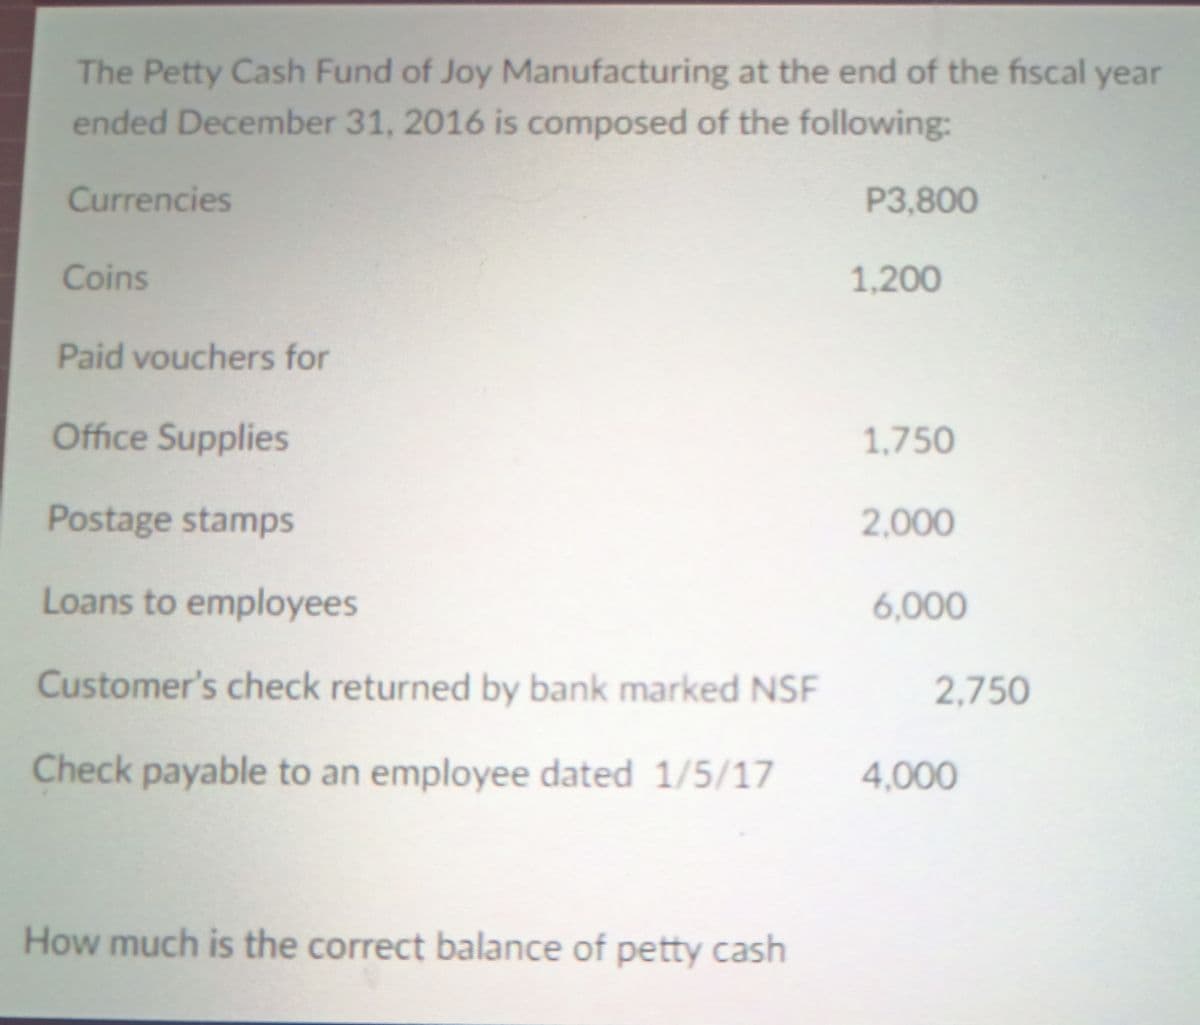 The Petty Cash Fund of Joy Manufacturing at the end of the fiscal year
ended December 31, 2016 is composed of the following:
Currencies
P3,800
Coins
1,200
Paid vouchers for
Office Supplies
1,750
Postage stamps
2,000
Loans to employees
6,000
Customer's check returned by bank marked NSF
2,750
Check payable to an employee dated 1/5/17
4,000
How much is the correct balance of petty cash
